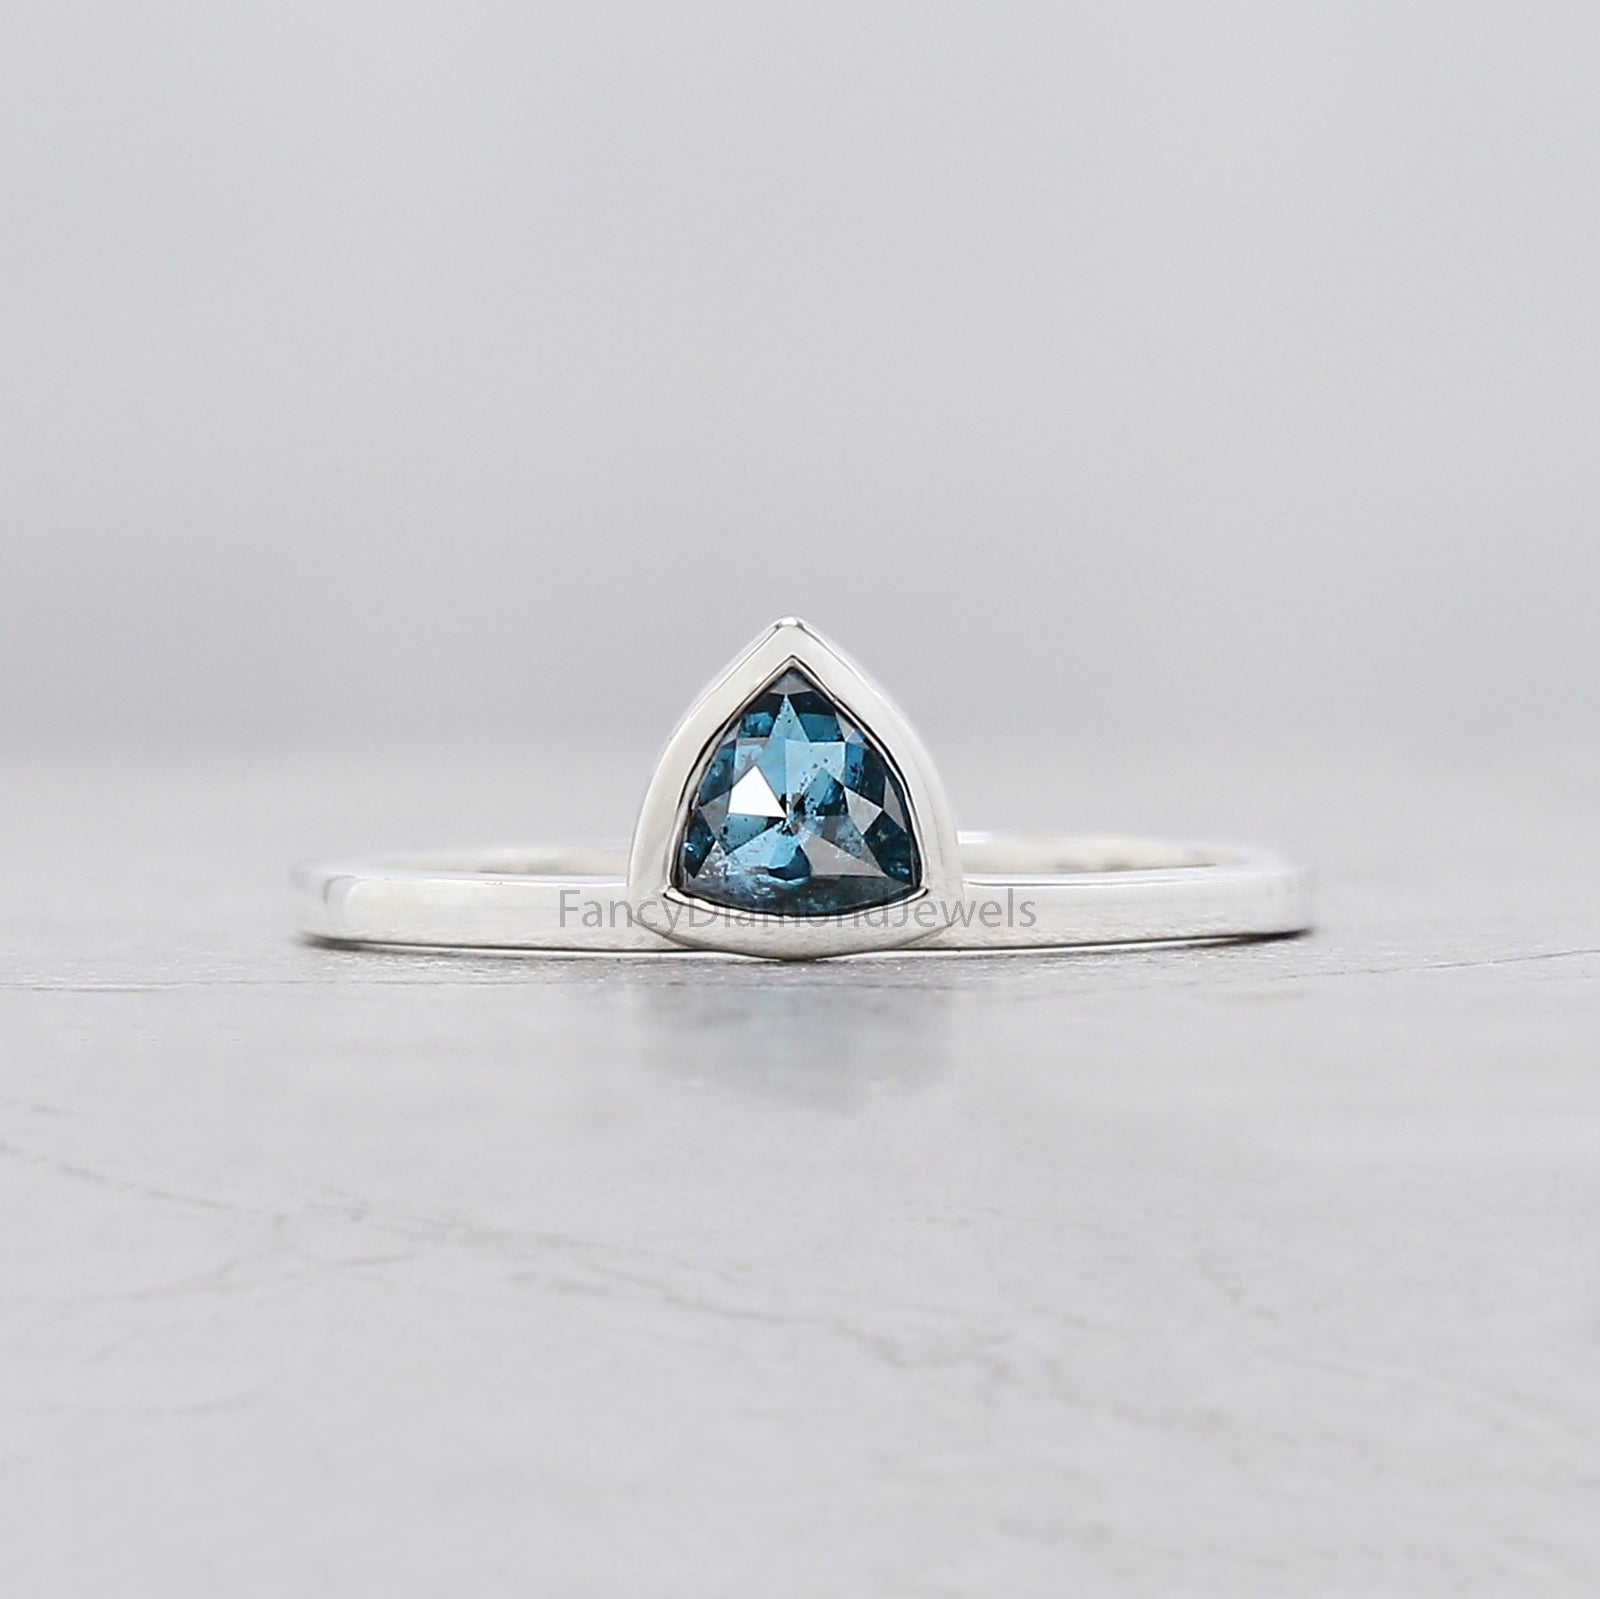 Triangle Blue Color Diamond Ring, Blue Color Triangle Diamond Engagement Ring, Triangle Diamond Ring, Triangle Bridal Ring Set KD1098